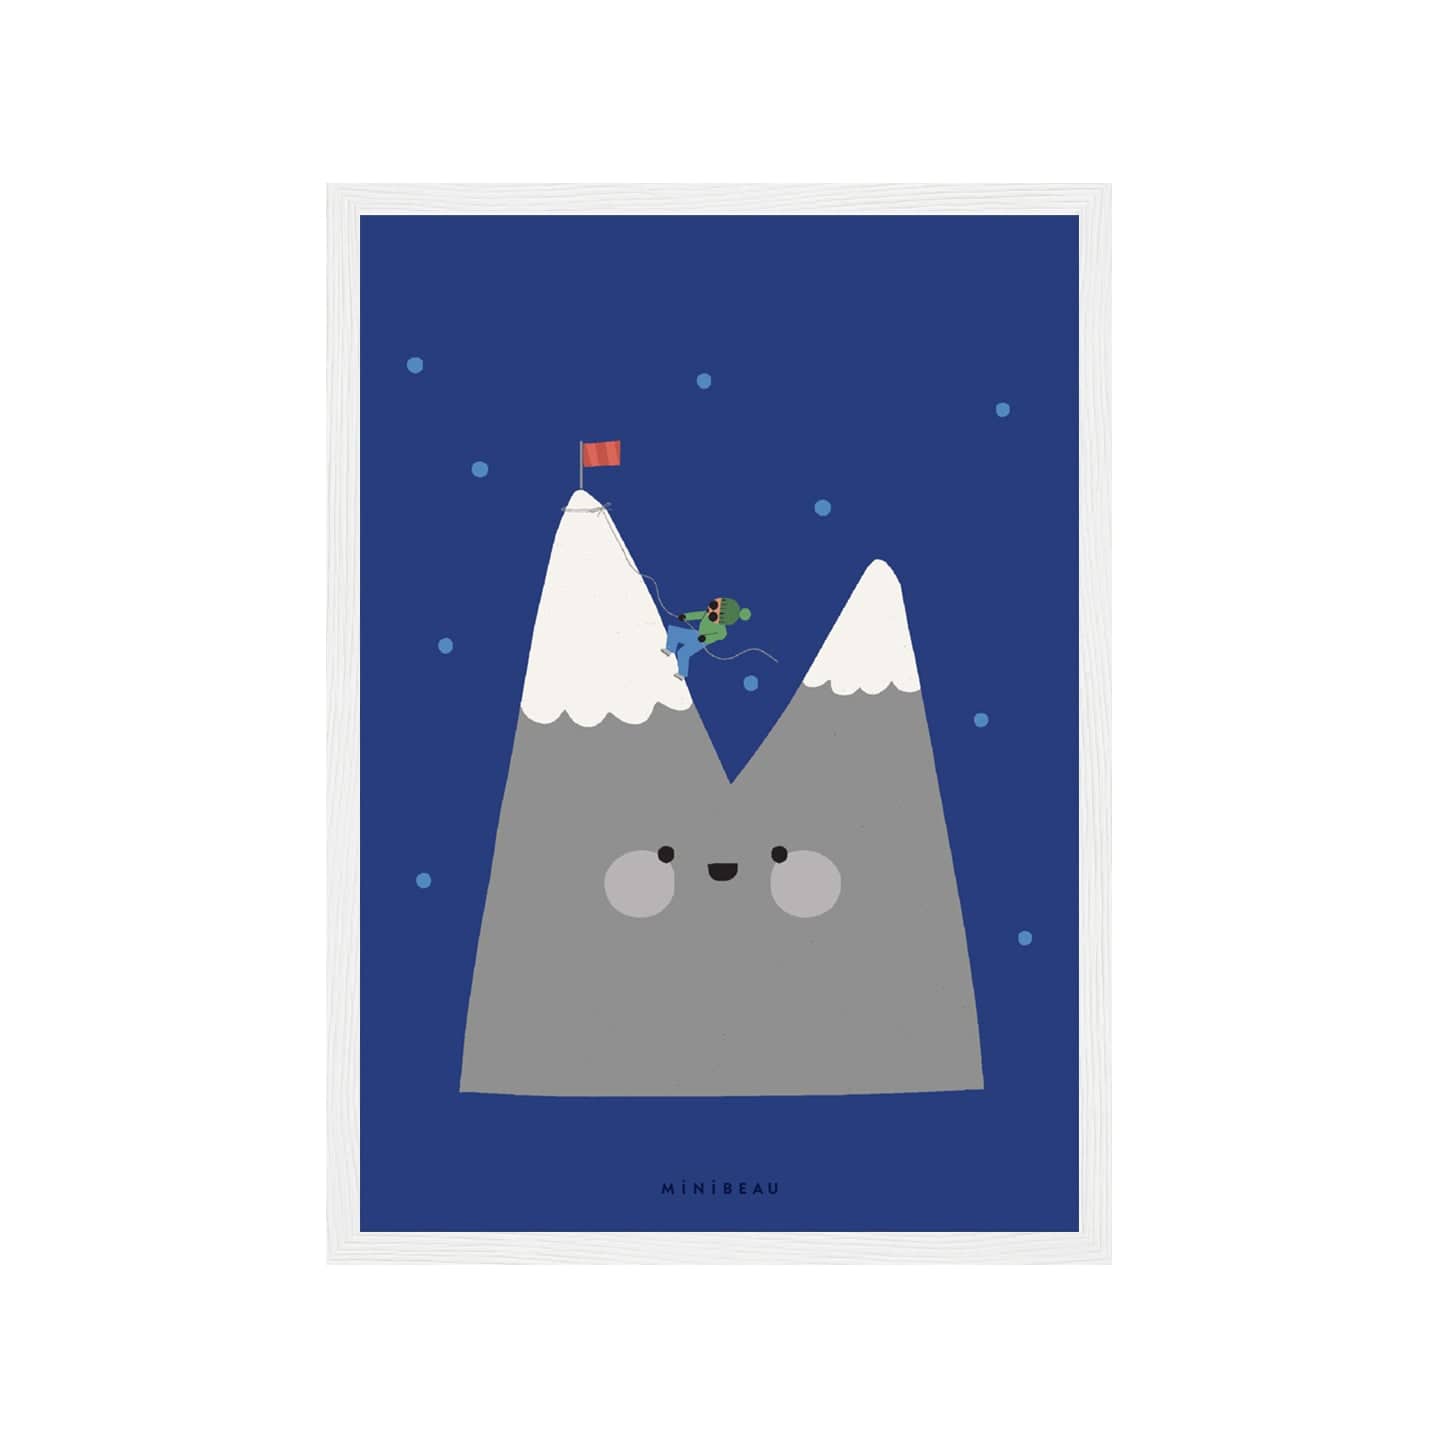 Art print in white frame. Our Happy Alphabet 'M' Art Print shows a twin peaked, snow topped mountain, with a mountain climber in blue and green climbing up to a red flag. On a blue, with light blue dots background.